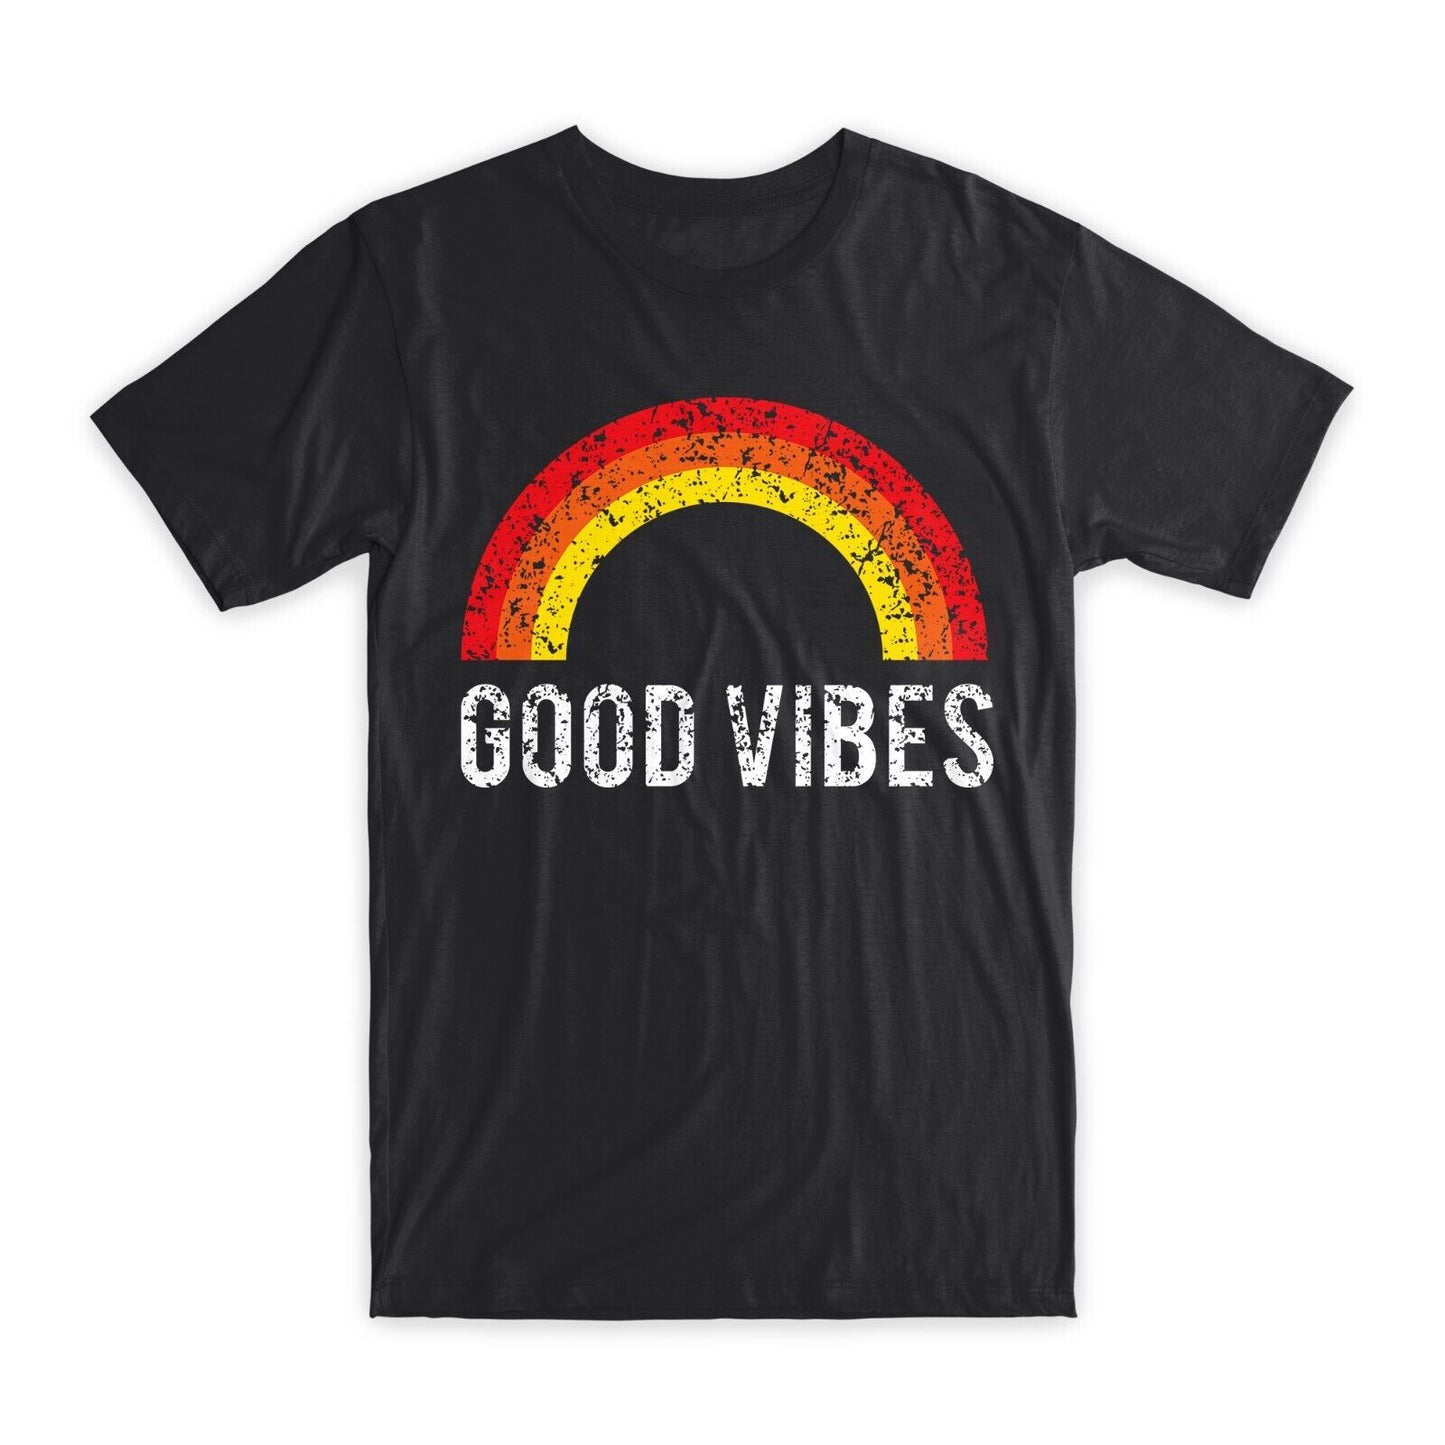 Good Vibes T-Shirt Premium Soft Cotton Crew Neck Funny Tees Novelty Gifts NEW